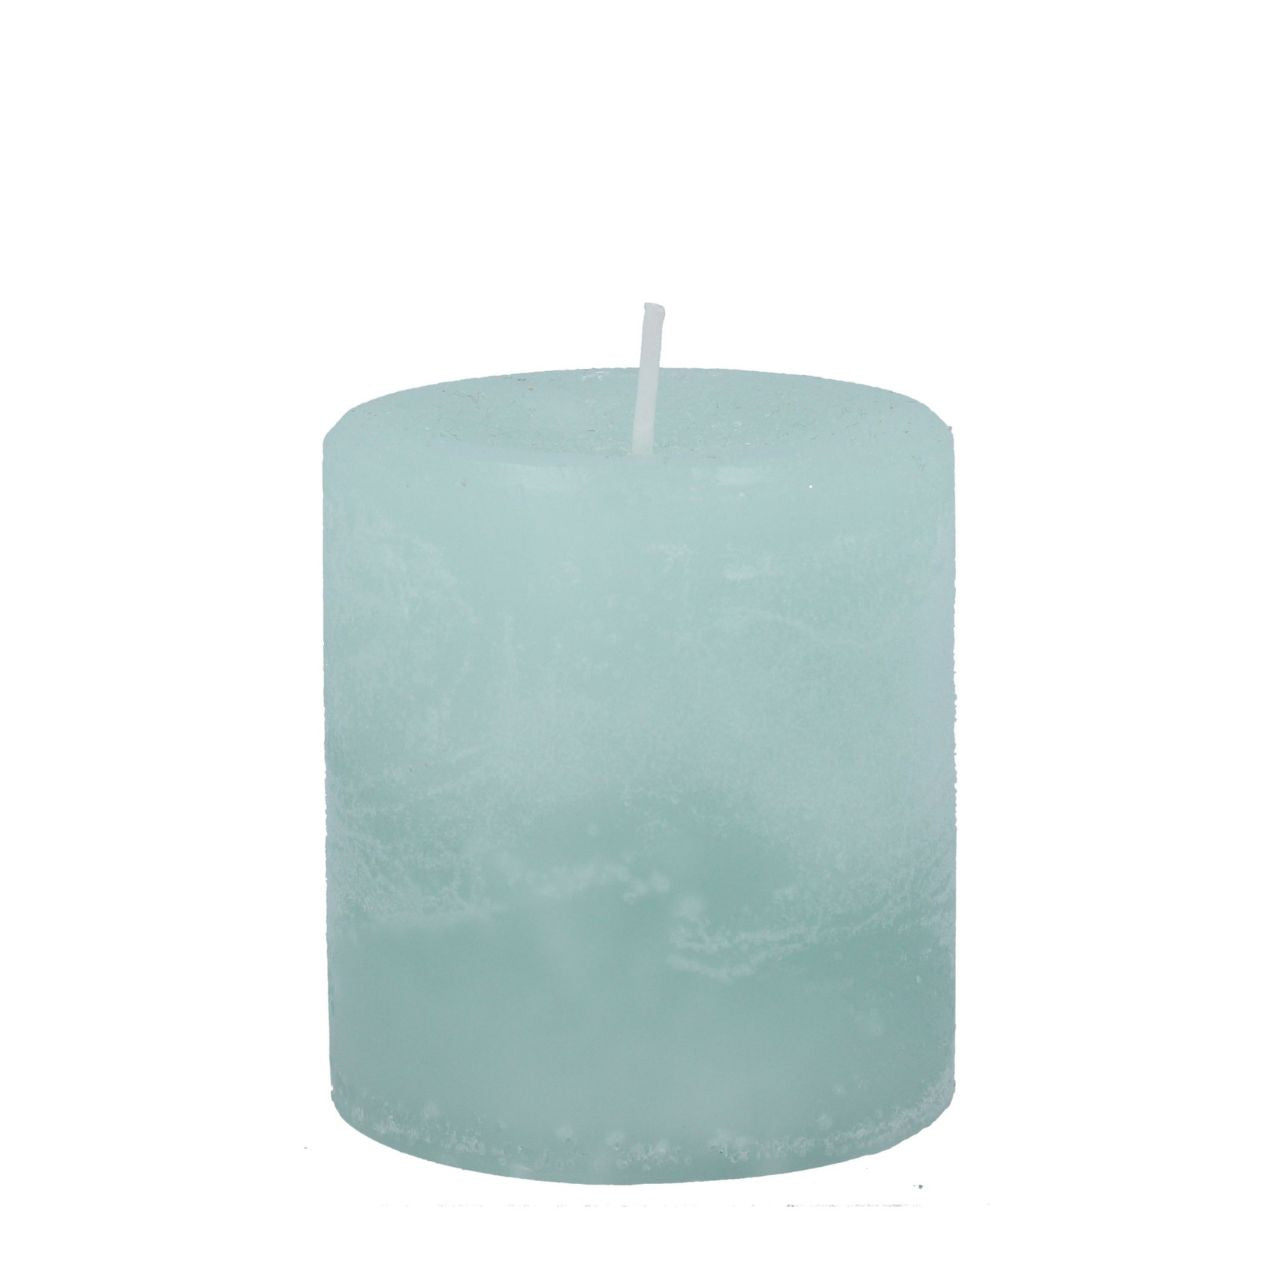 Gisela Graham Pillar Candle - Pale Blue Christmas Decoration  This premium pale blue pillar candle from Gisela Graham is a sophisticated addition to any Christmas table. With a long burn time, it offers continual light and atmosphere for special occasions. The warm glow of the candle adds a festive touch to your home.